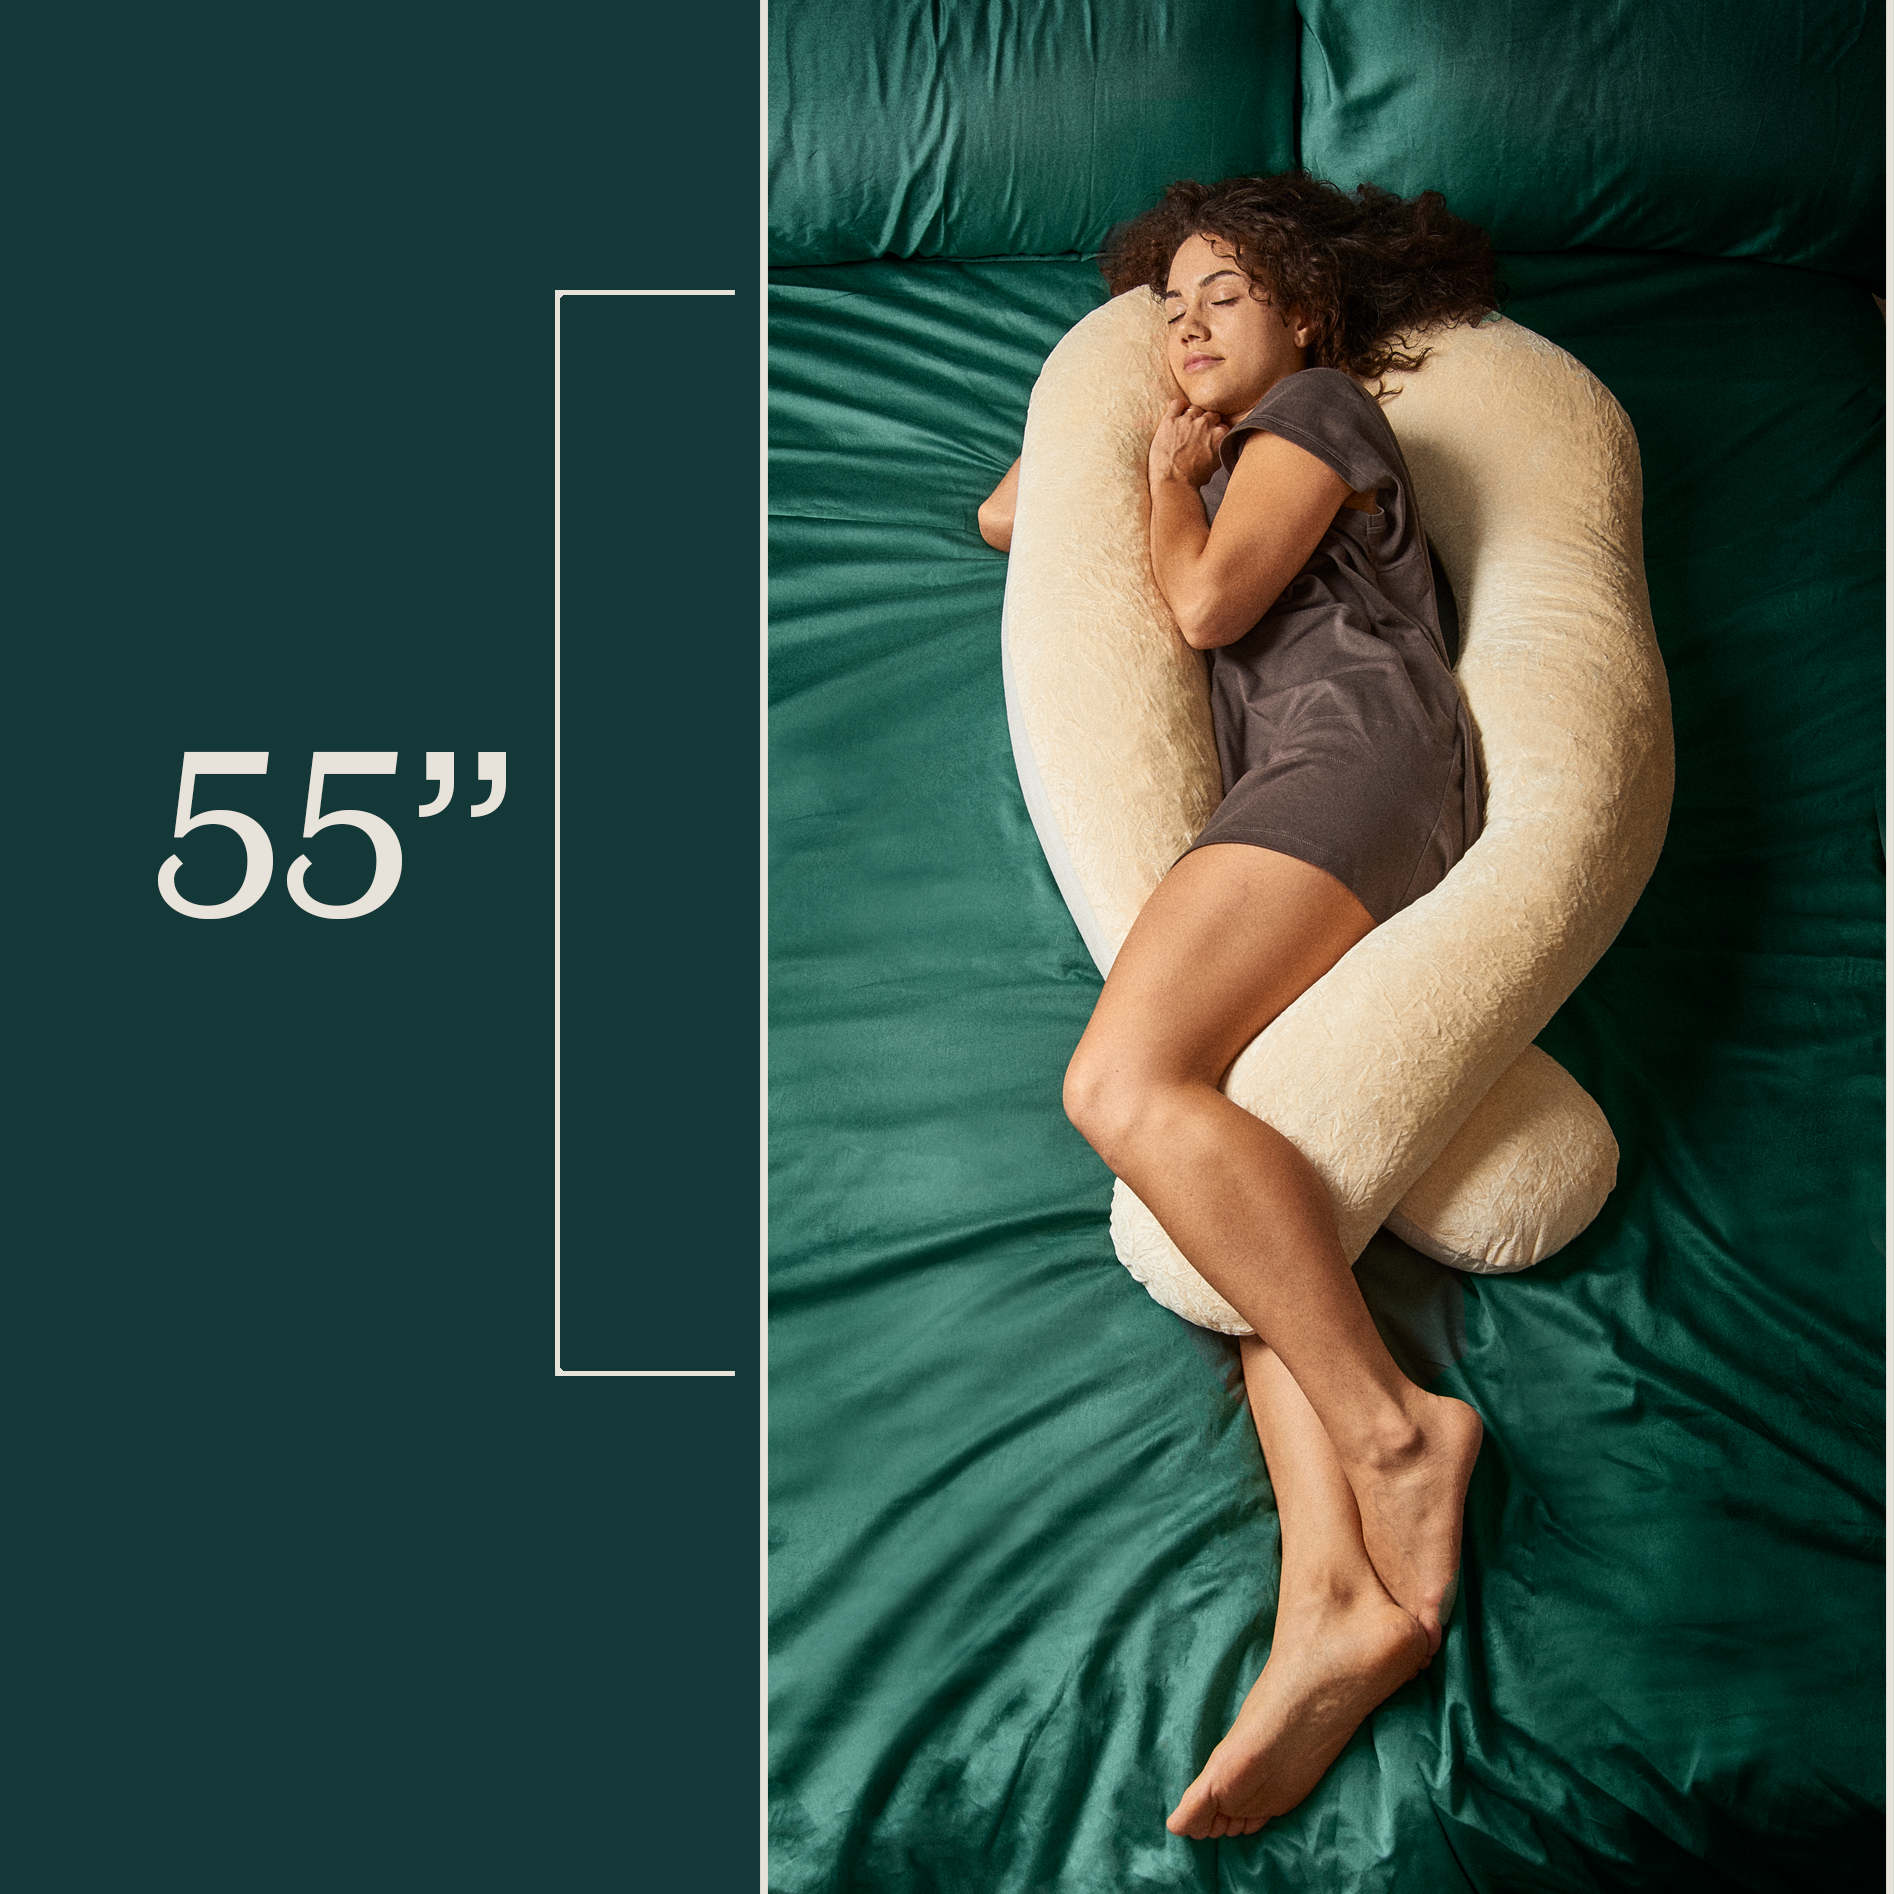 Yana Body Pillow review: We tried the viral body pillow and loved